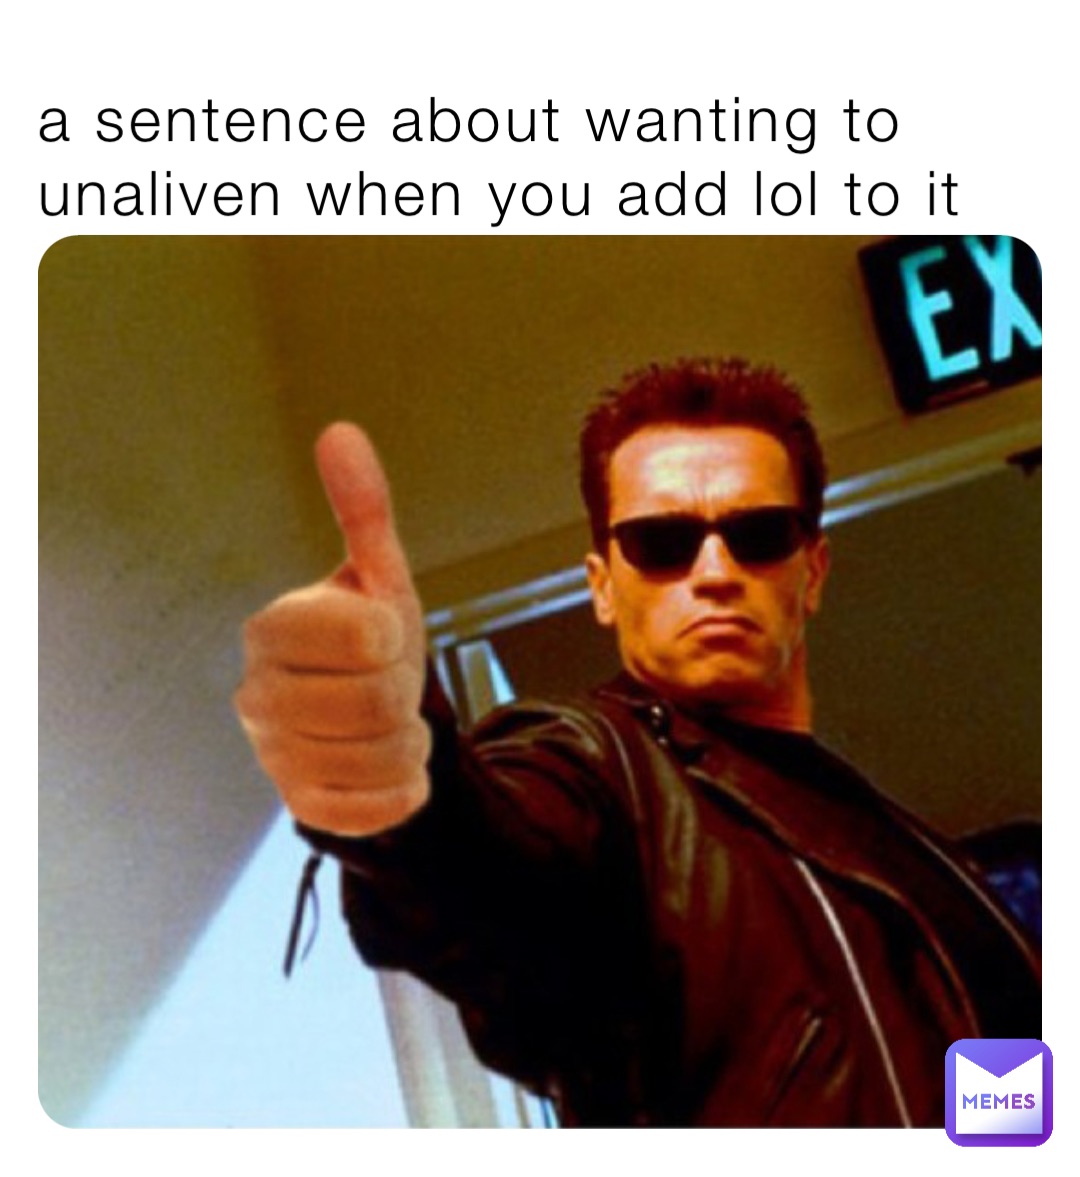 a sentence about wanting to unaliven when you add lol to it